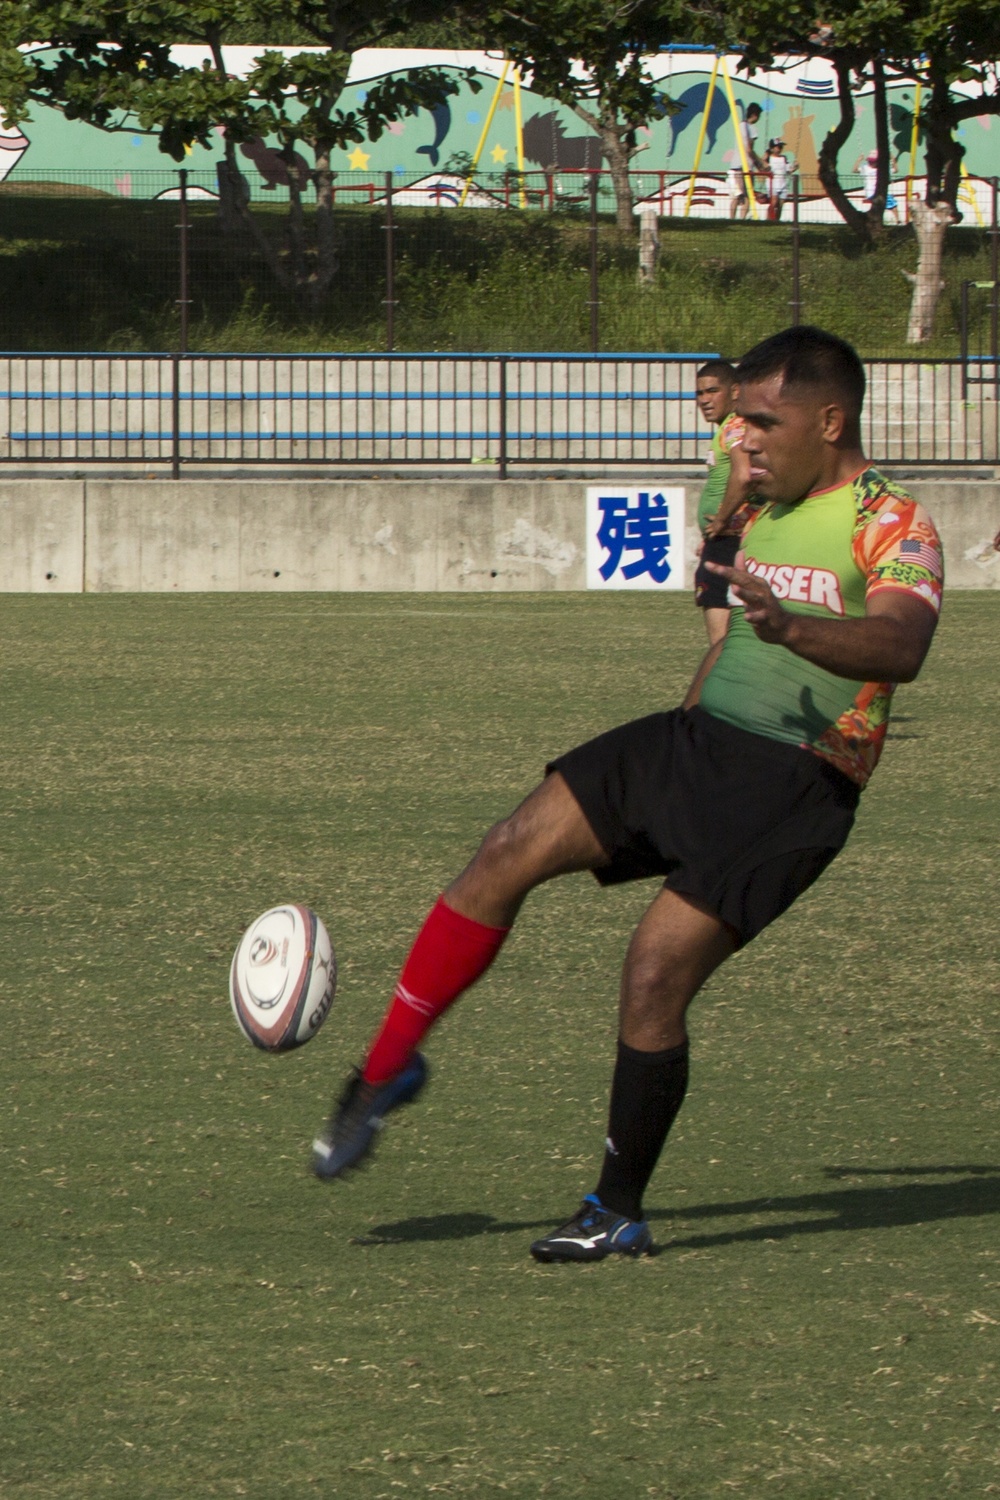 Military, local communities’ teams welcome the Hong Kong Rugby Football Club to the 4th Annual Battle on the Rock Rugby Tournament